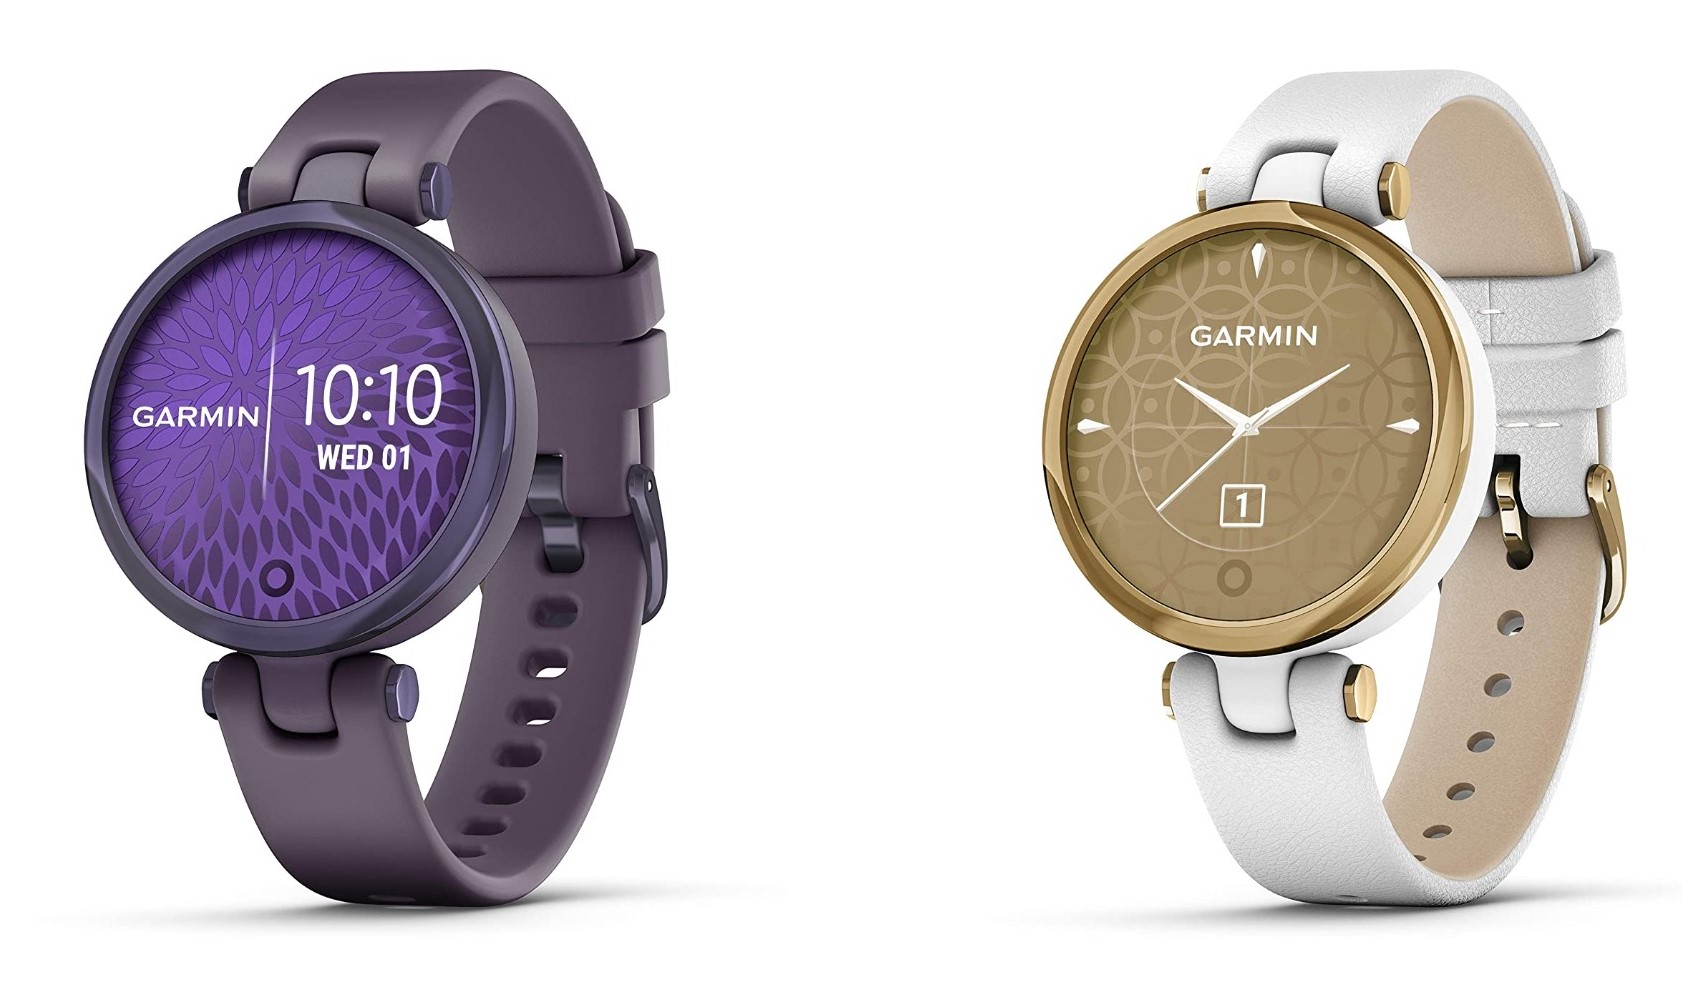 Garmin launches new women-focused smartwatch with pregnancy tracker